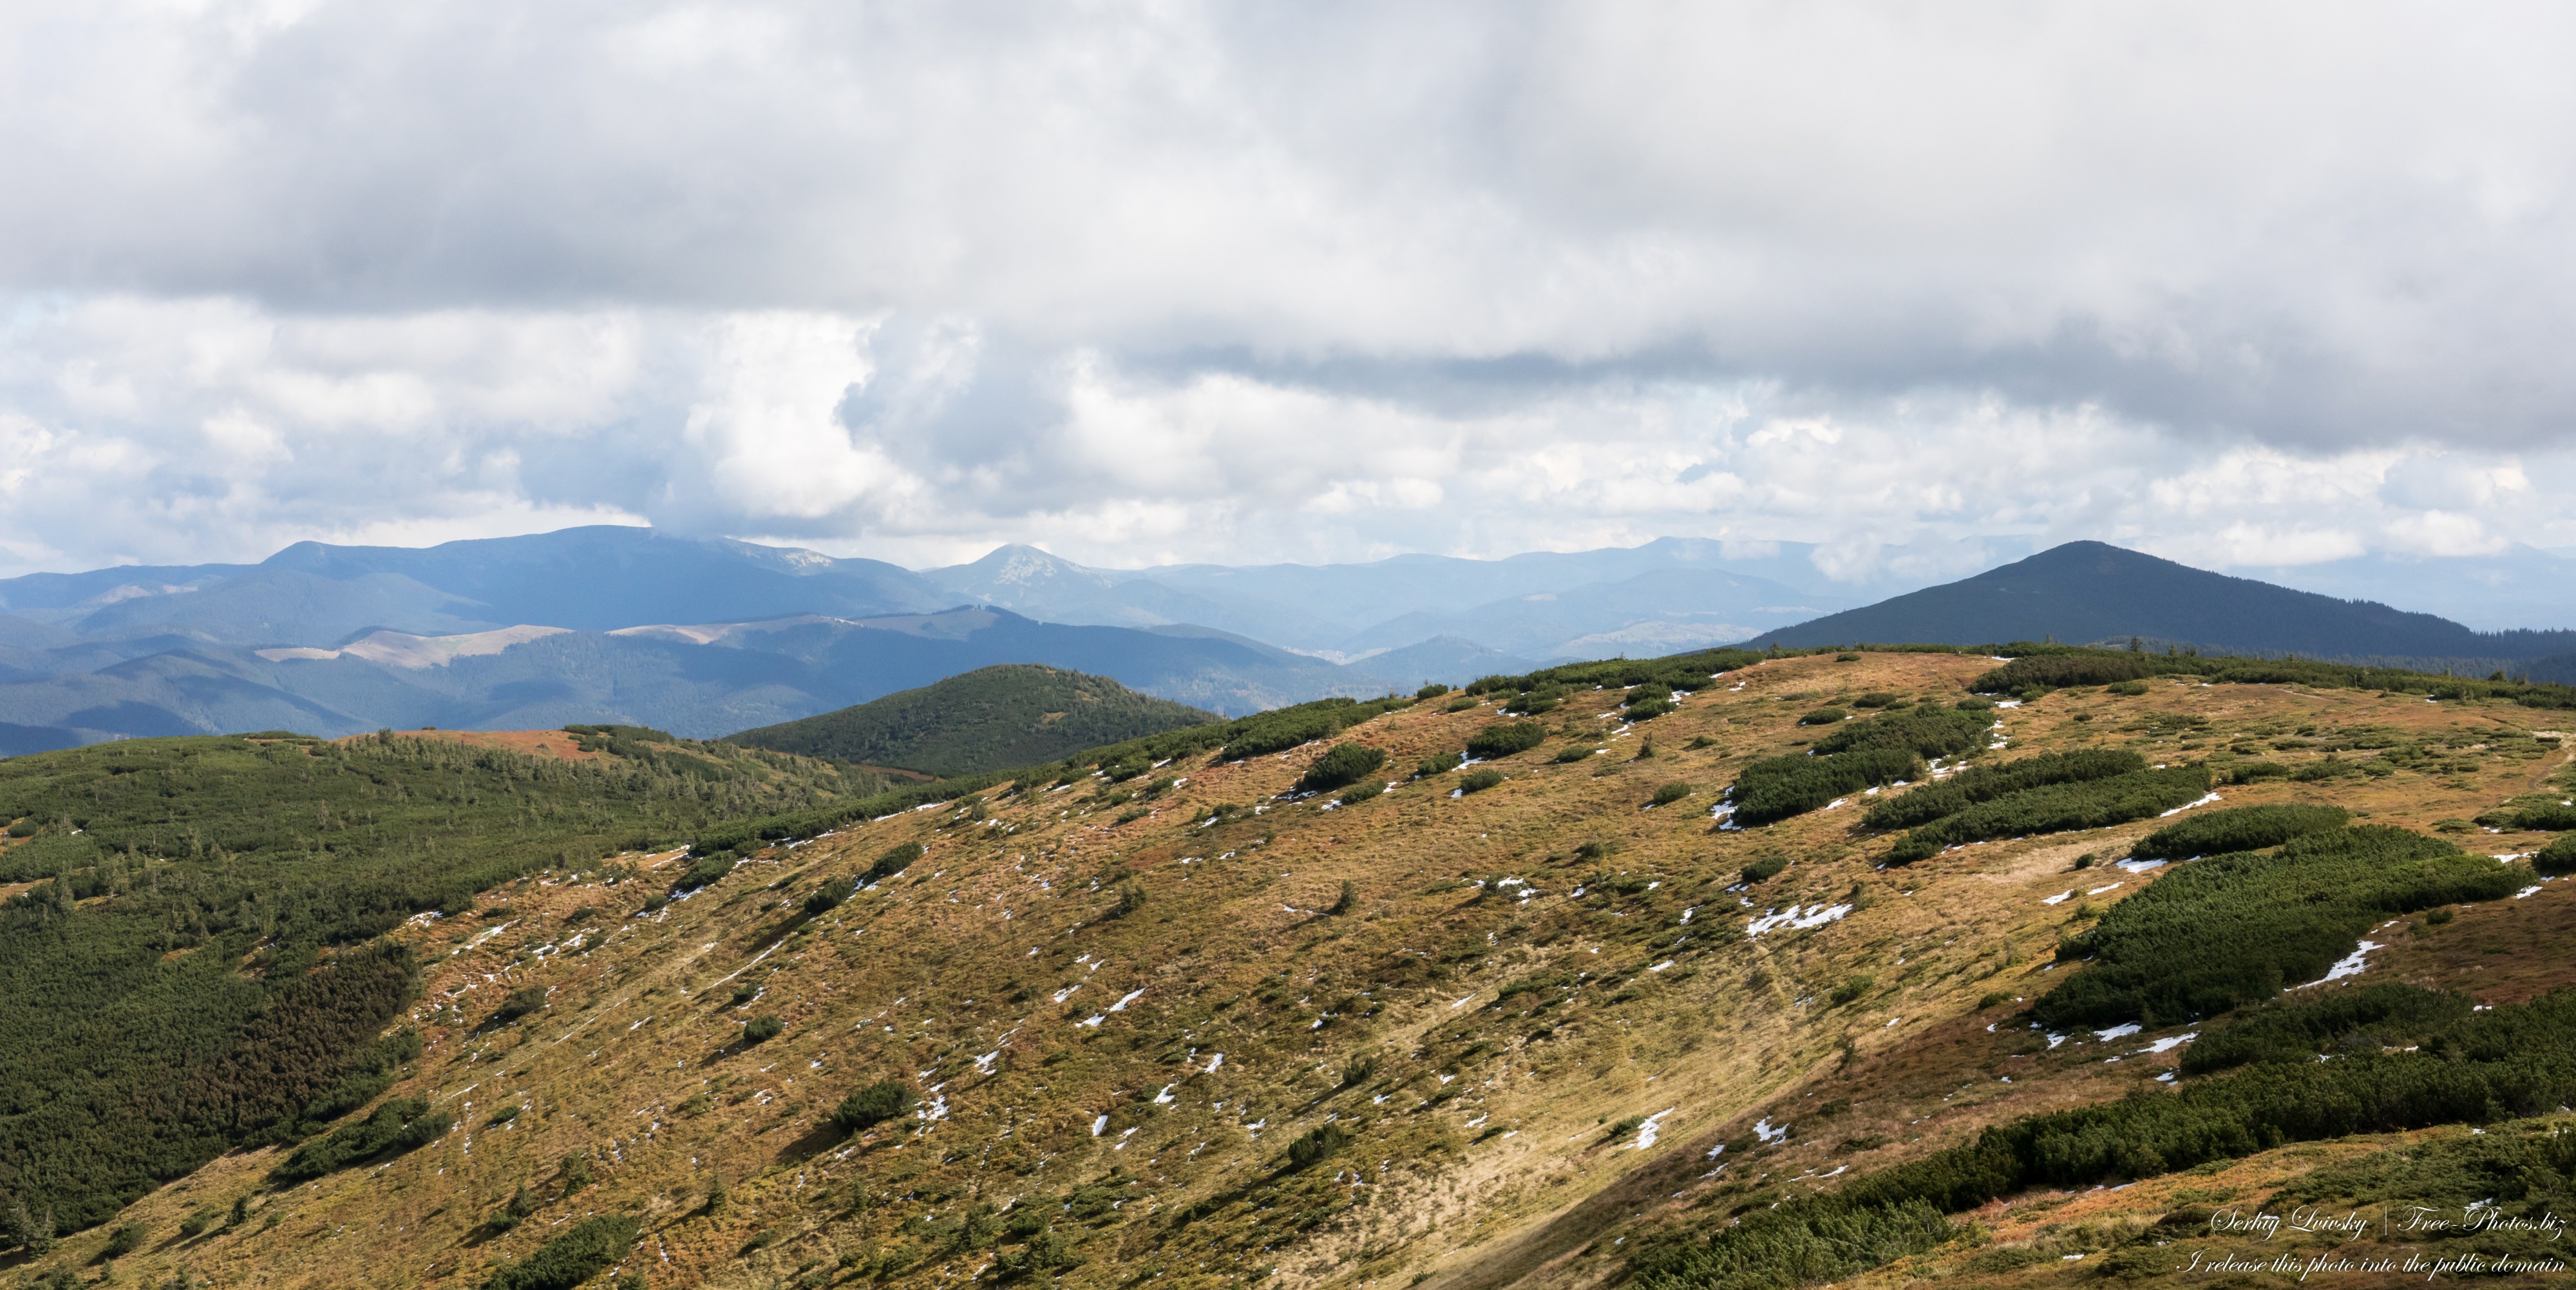 Carpathians in Ukraine in September 2022 photographed by Serhiy Lvivsky, picture 49